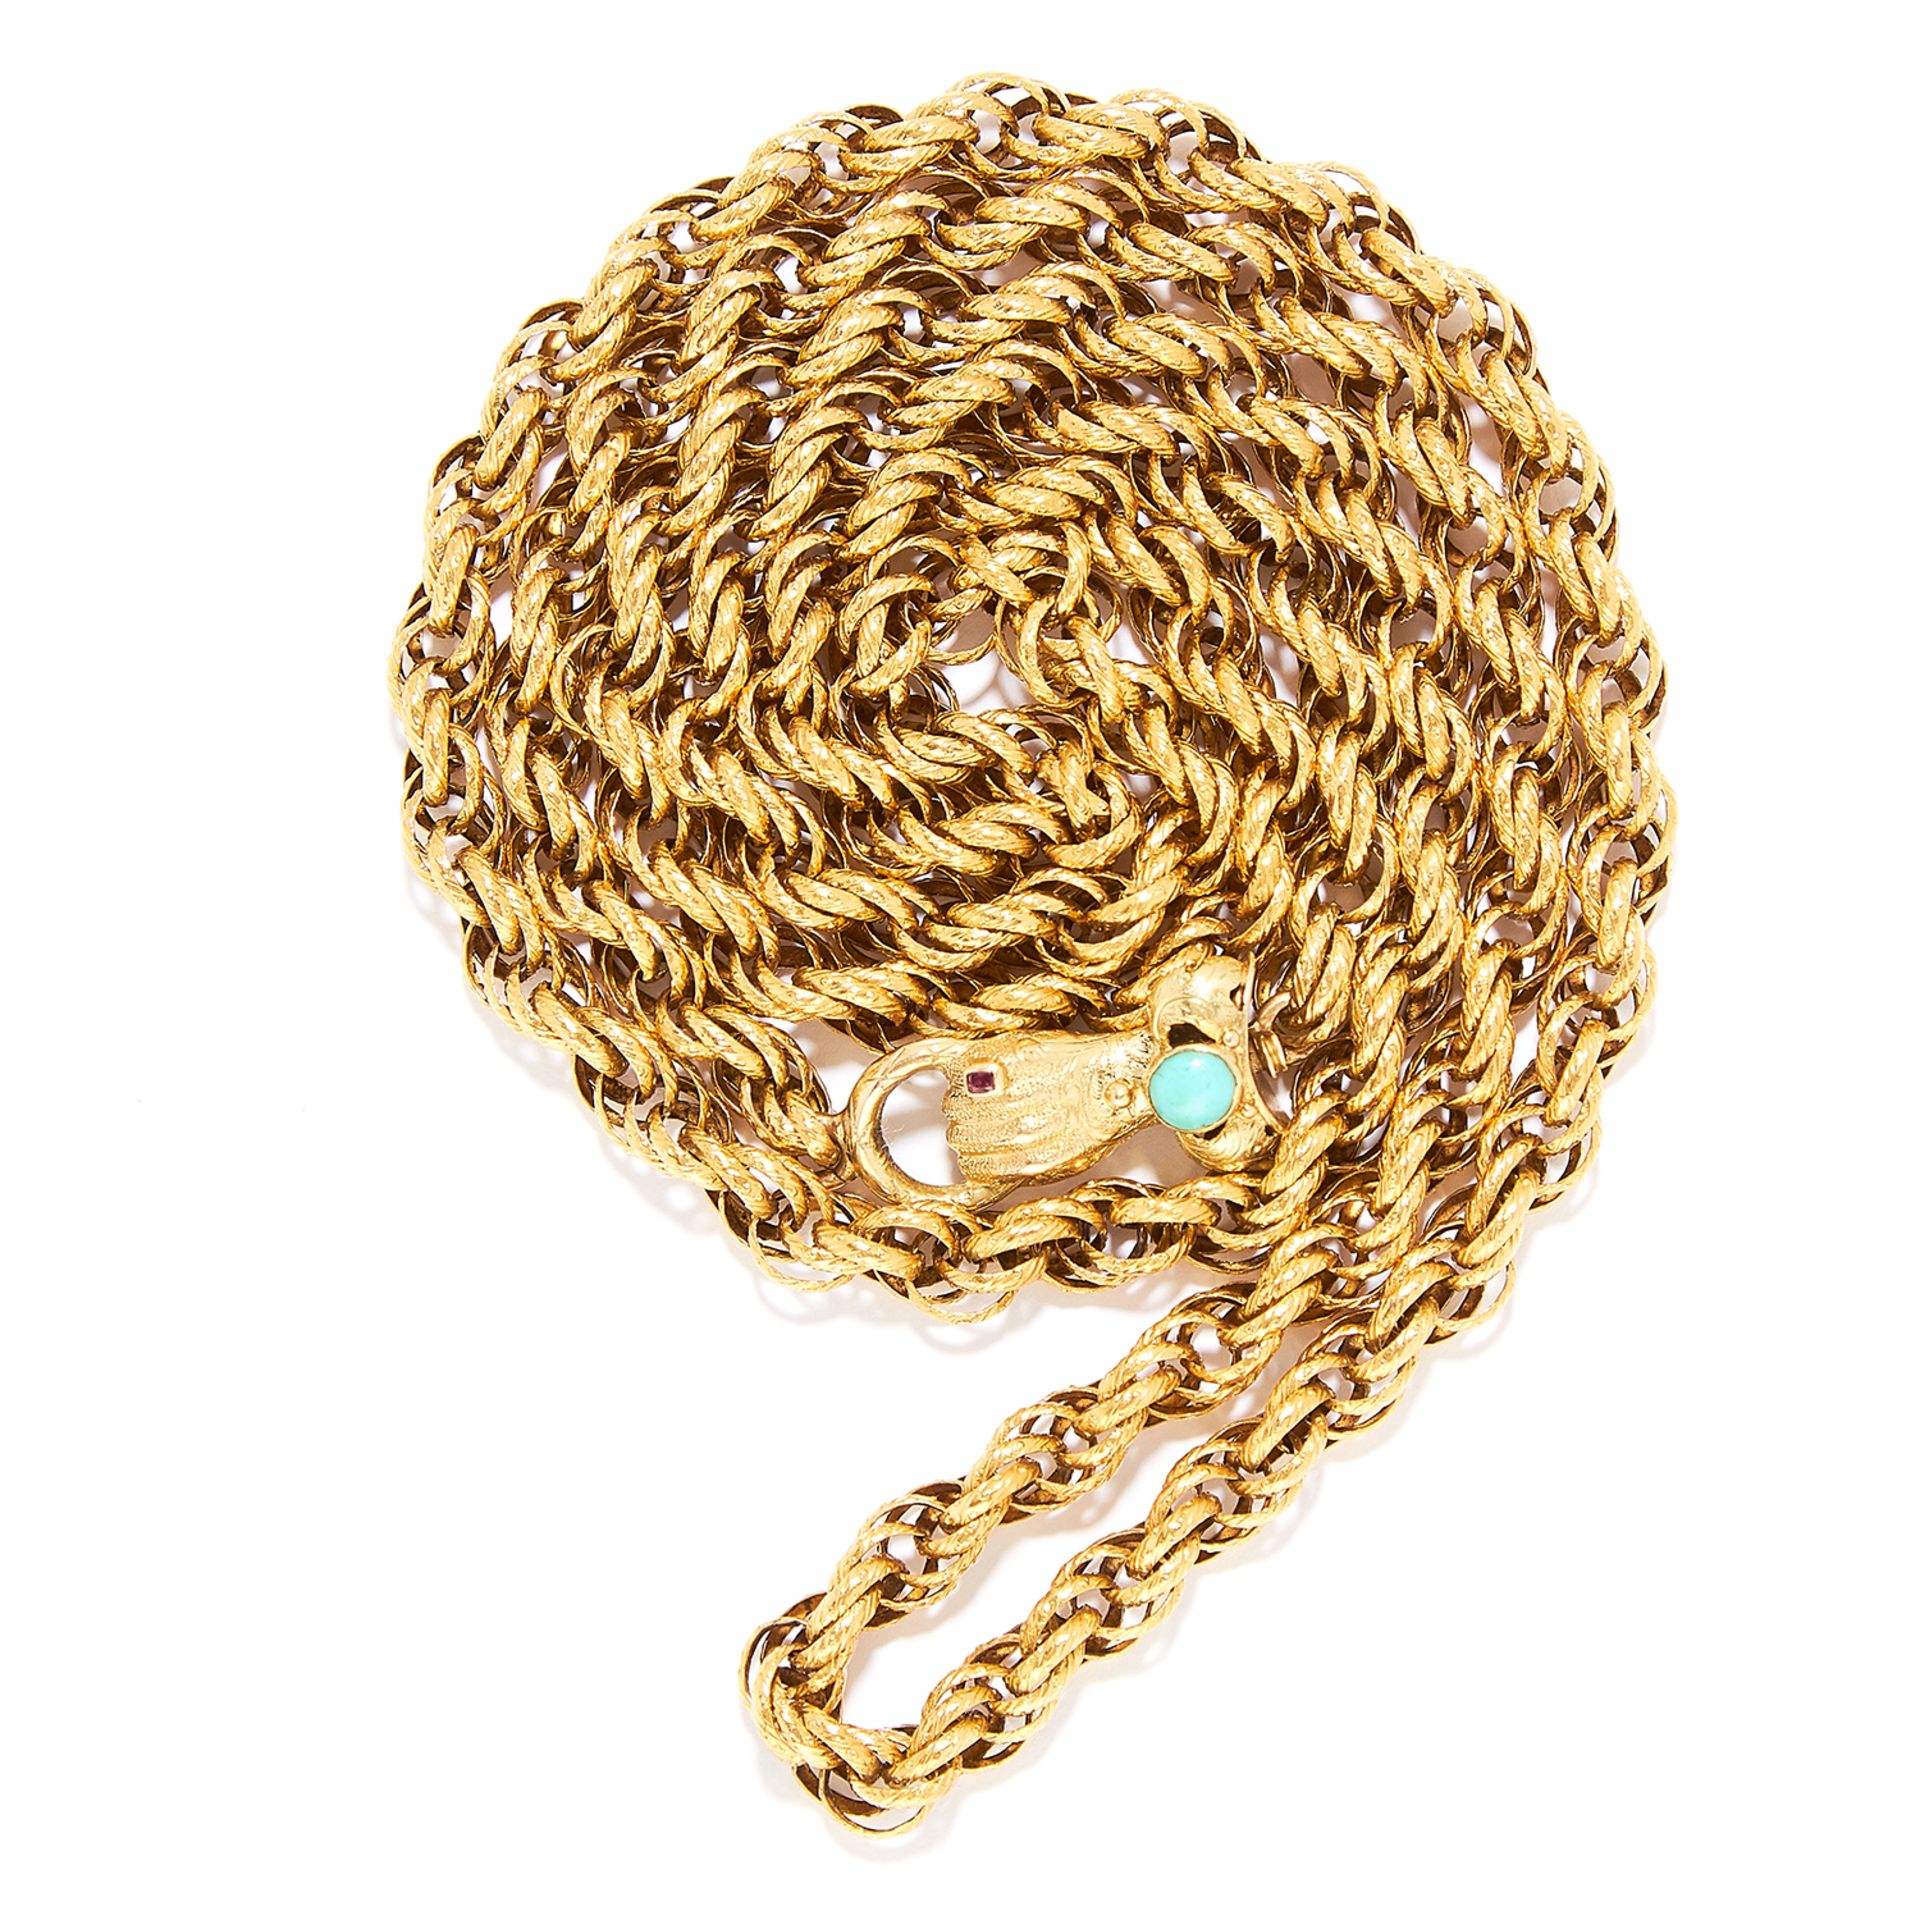 ANTIQUE GEORGIAN TURQUOISE AND GARNET FANCY LINK CHAIN in yellow gold, comprising of a fancy link